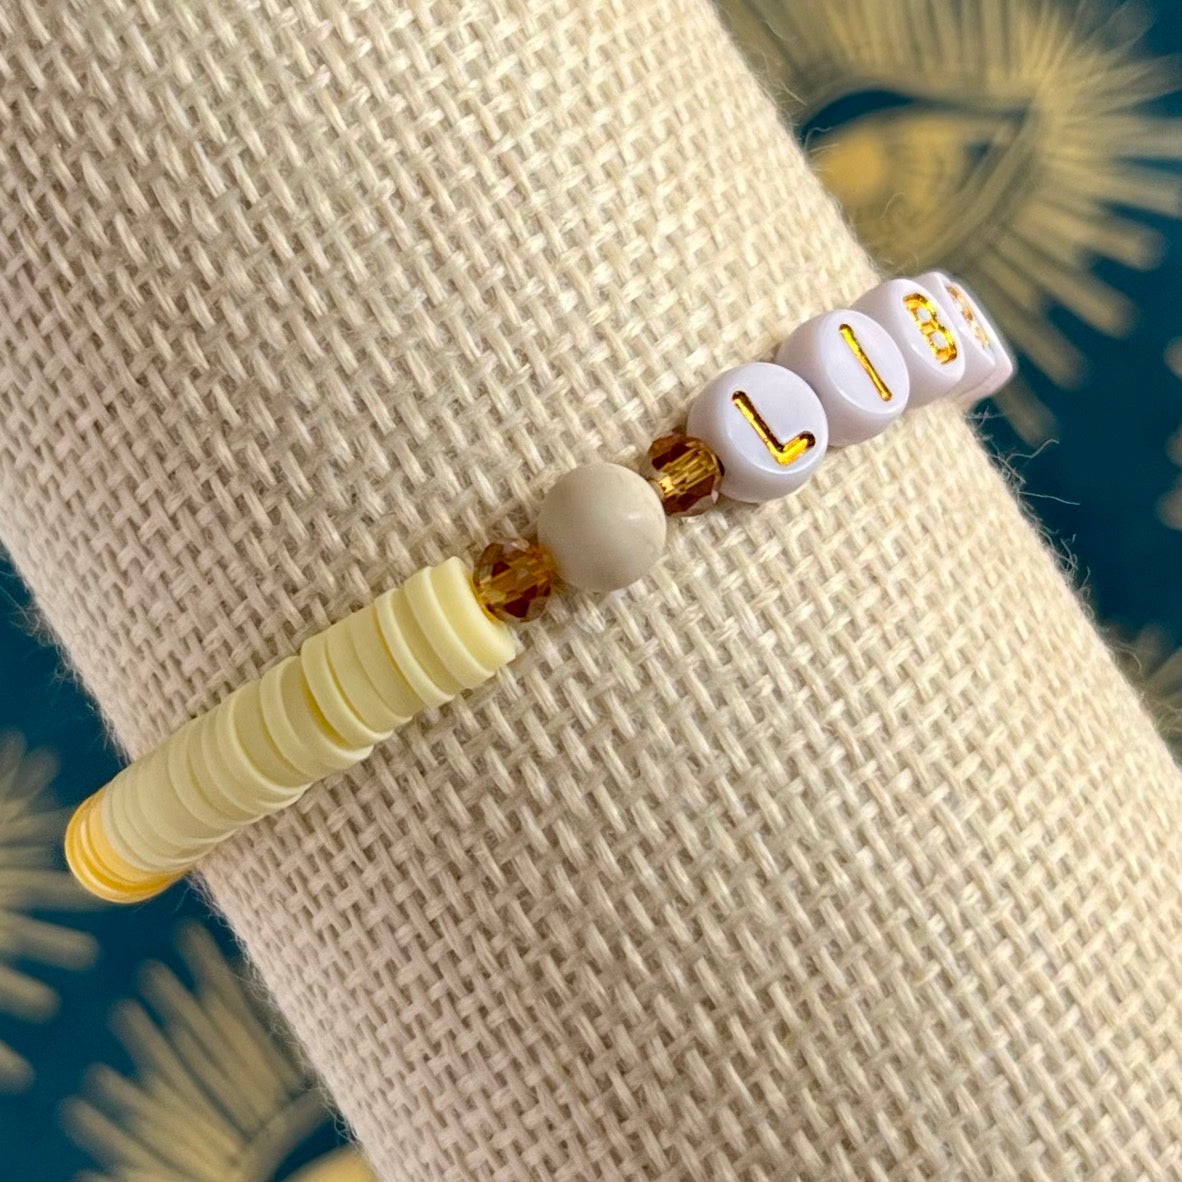 Libra Zodiac Bracelet: White Gold Letter Beads with Sunstone and tigers eye  stone beads